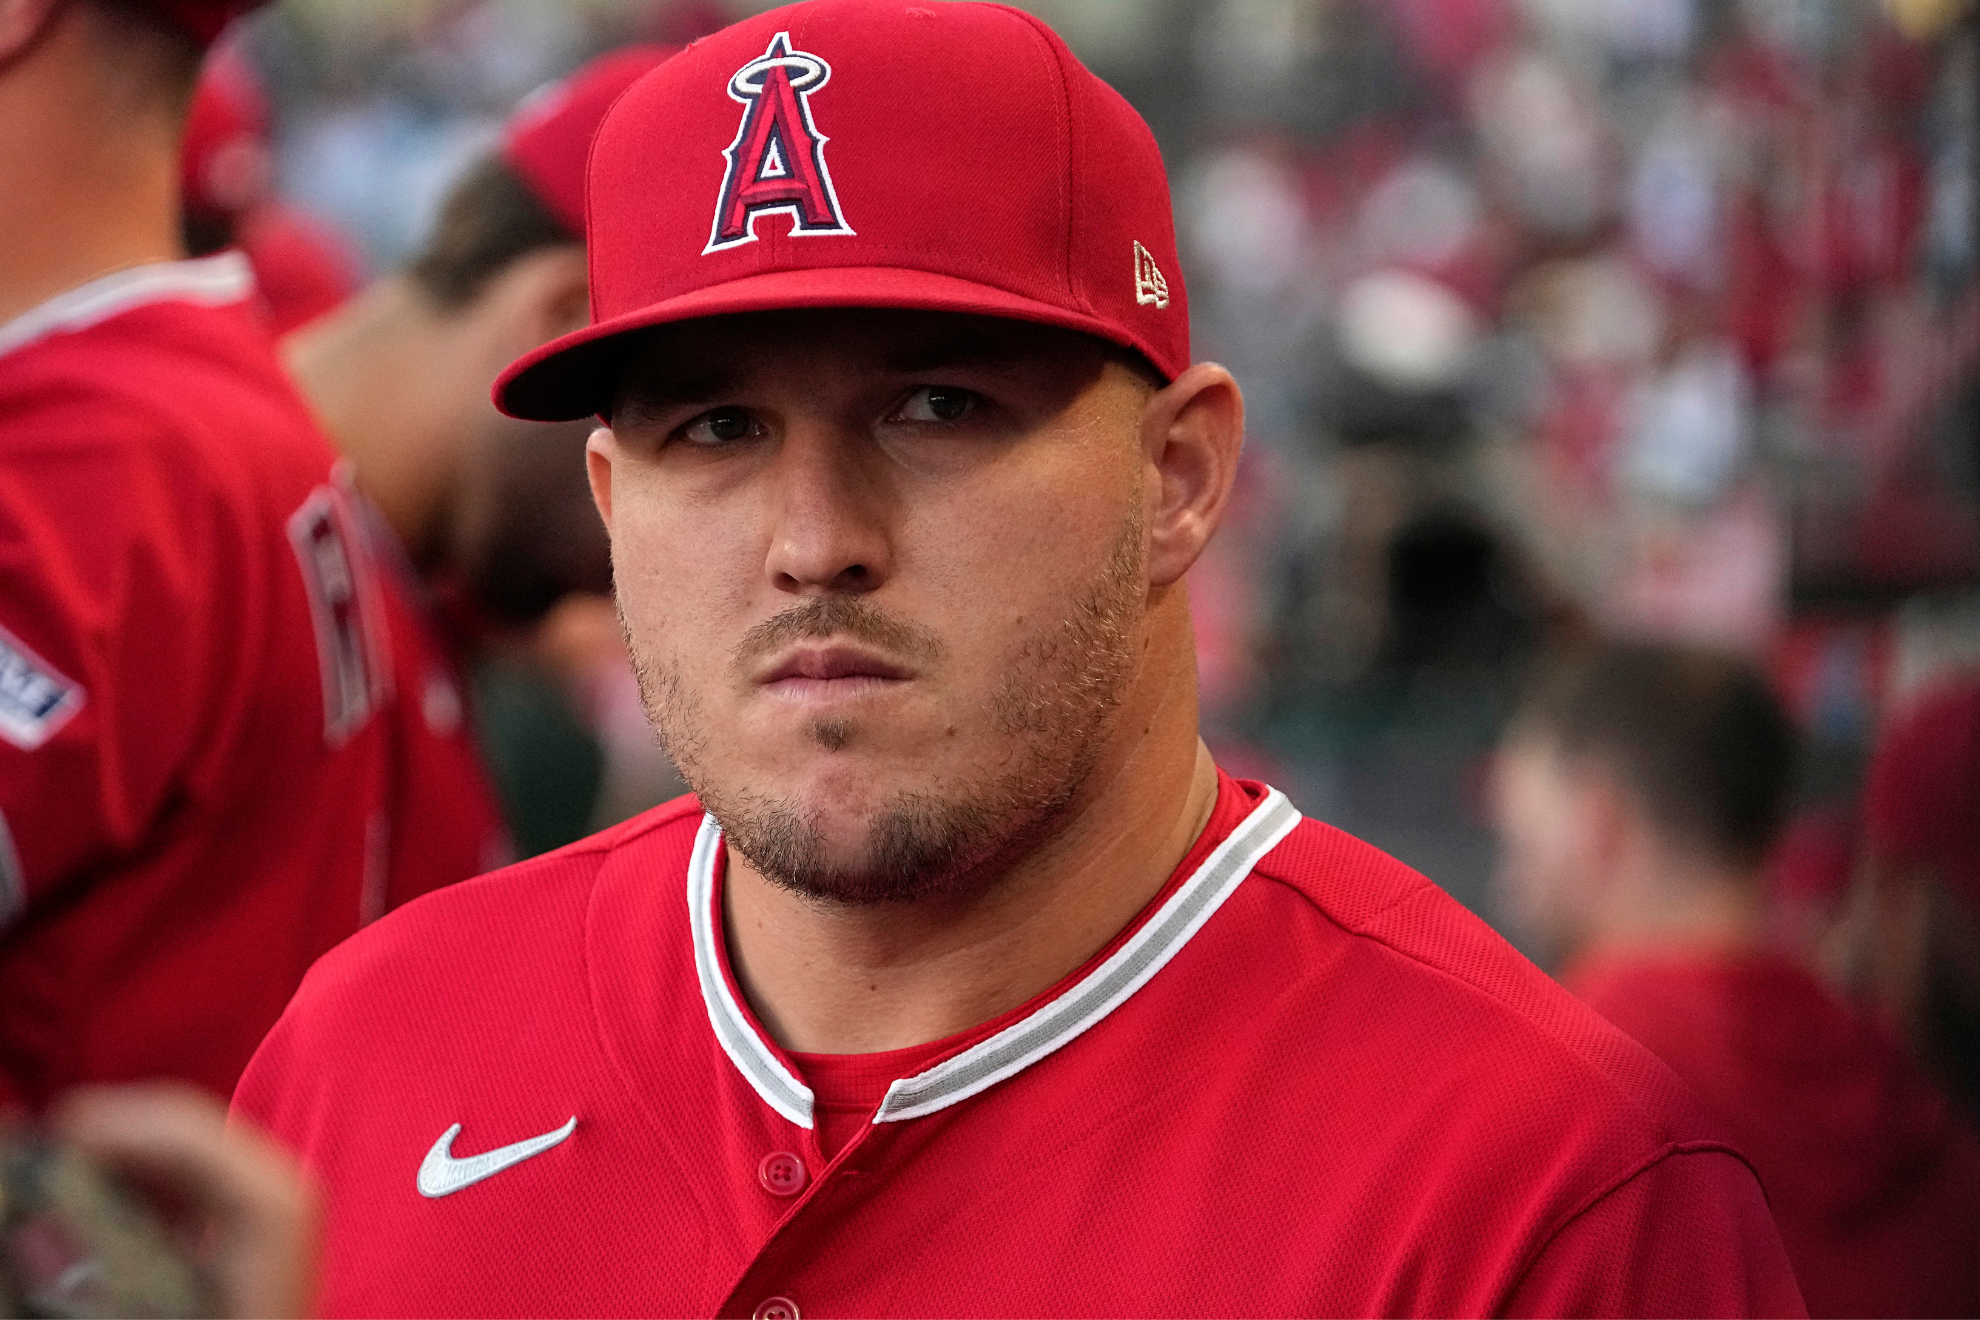 Trout has played only 82 games this season.